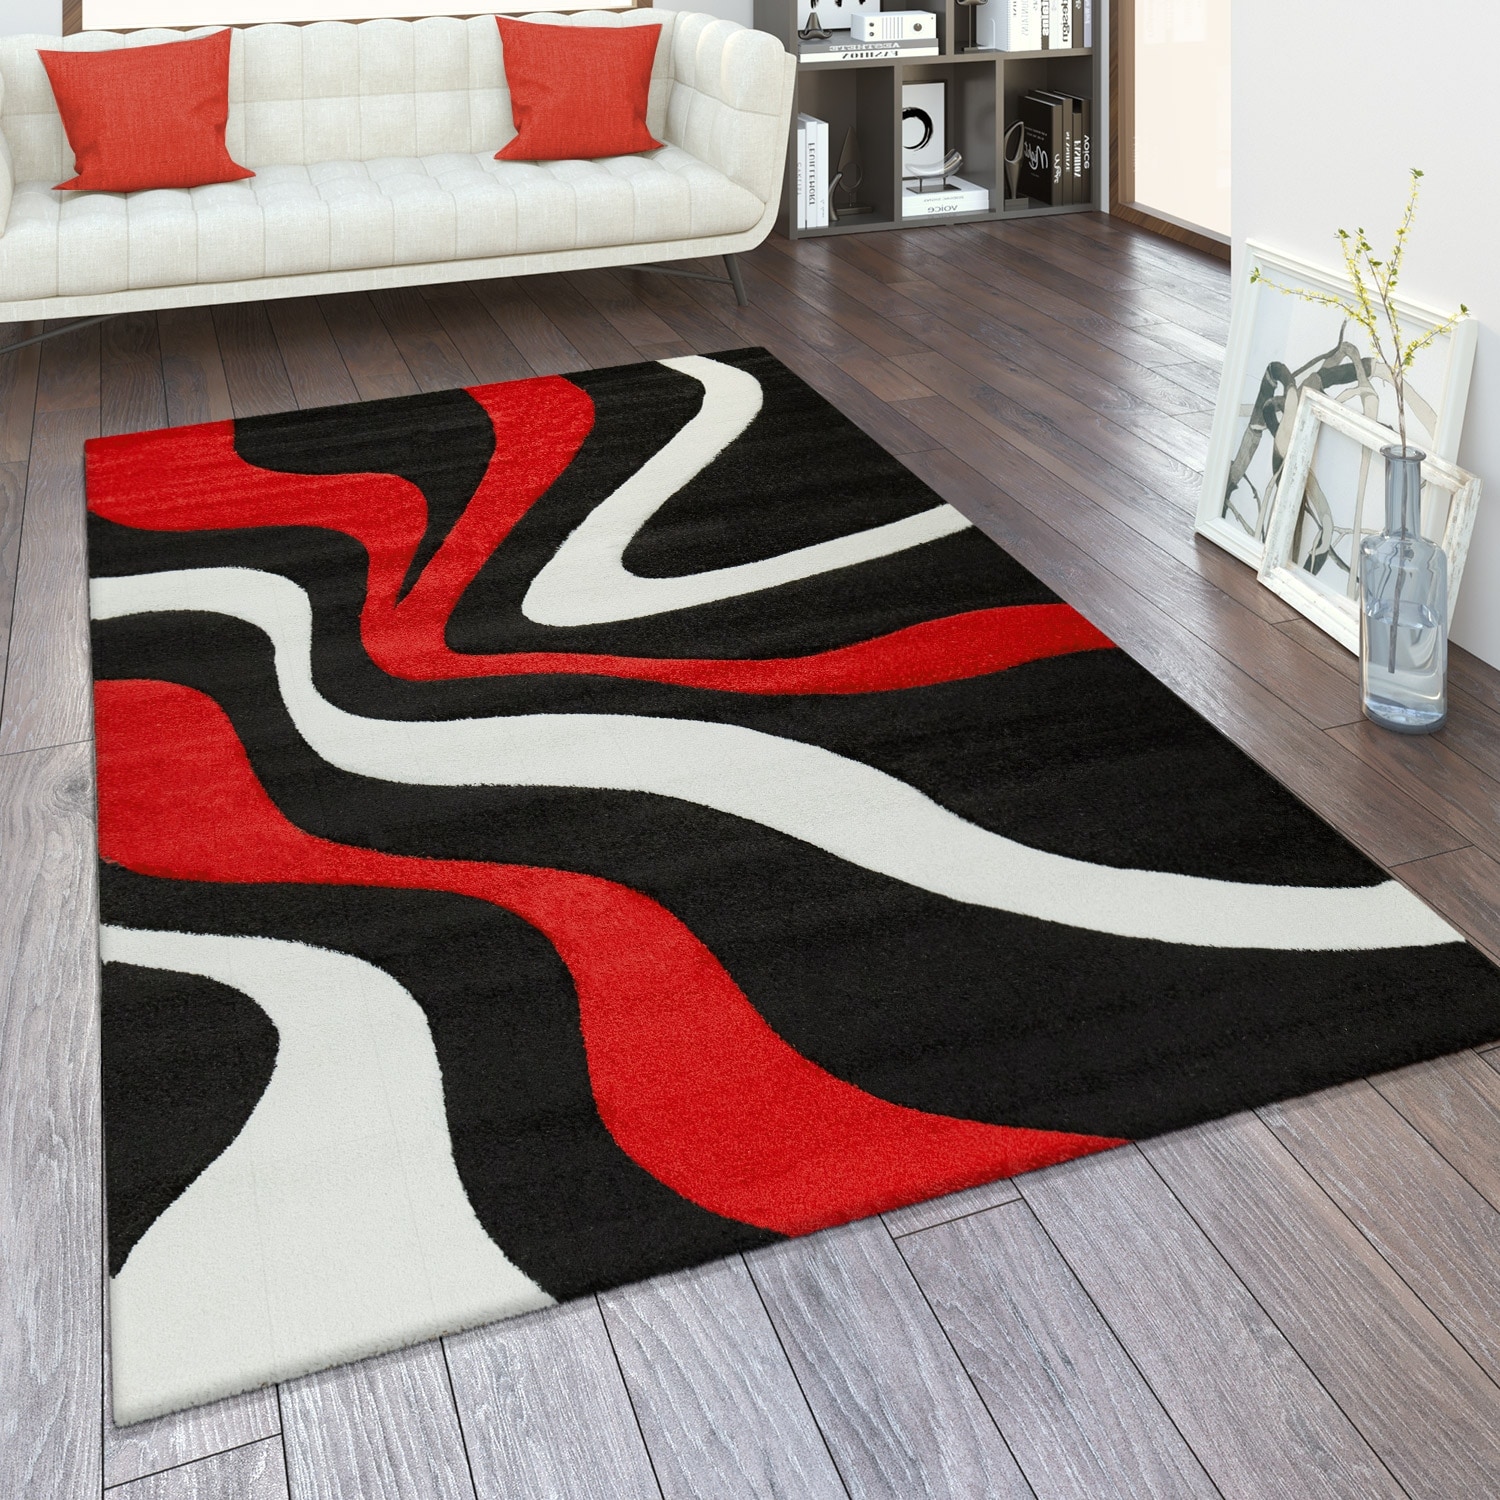 Paco Home Designer Area Rug with Contour Cut and Modern Wave Pattern 7'10" x 10'10" - Grey-blue - image 5 of 5